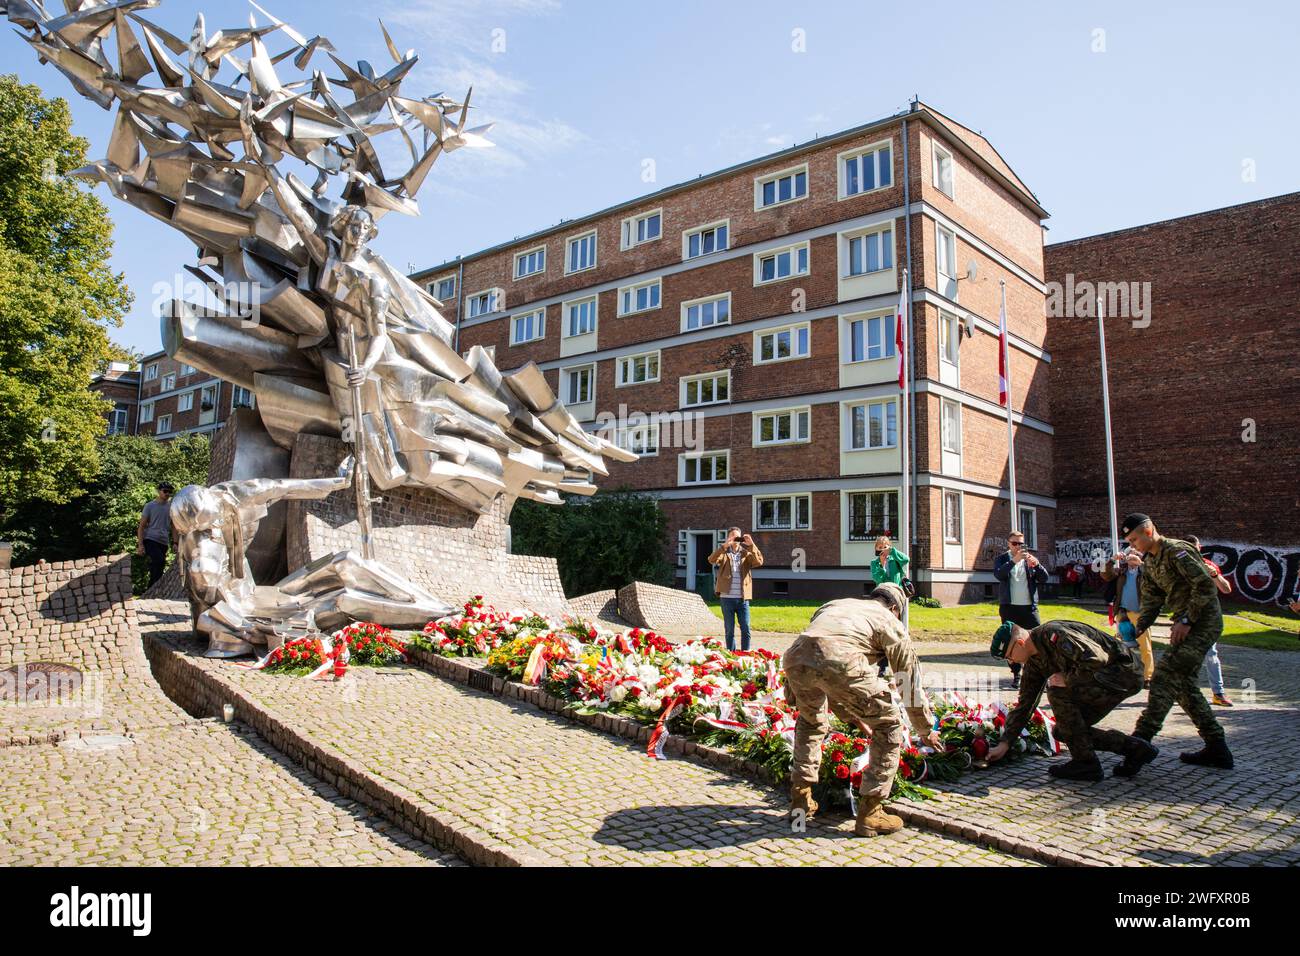 A U.S. Soldier with 1st Battalion, 9th Cavalry Regiment, 1st Cavalry Division, supporting 4th Infantry Division, a Croatian soldier with the 11th Croatian Contingent, and a Polish soldier with the 15th Mechanized Brigade, lay flower wreaths at the Monument to Defenders of the Polish Post Office Memorial in Gdansk, Poland, Sept. 2. Members of Task Force Ivy and NATO allies from the enhanced Forward Presence Battle Group Poland visited Gdansk to learn about the historical significance of the area during World War II. The 4th Inf. Div.'s mission in Europe is to engage in multinational training an Stock Photo